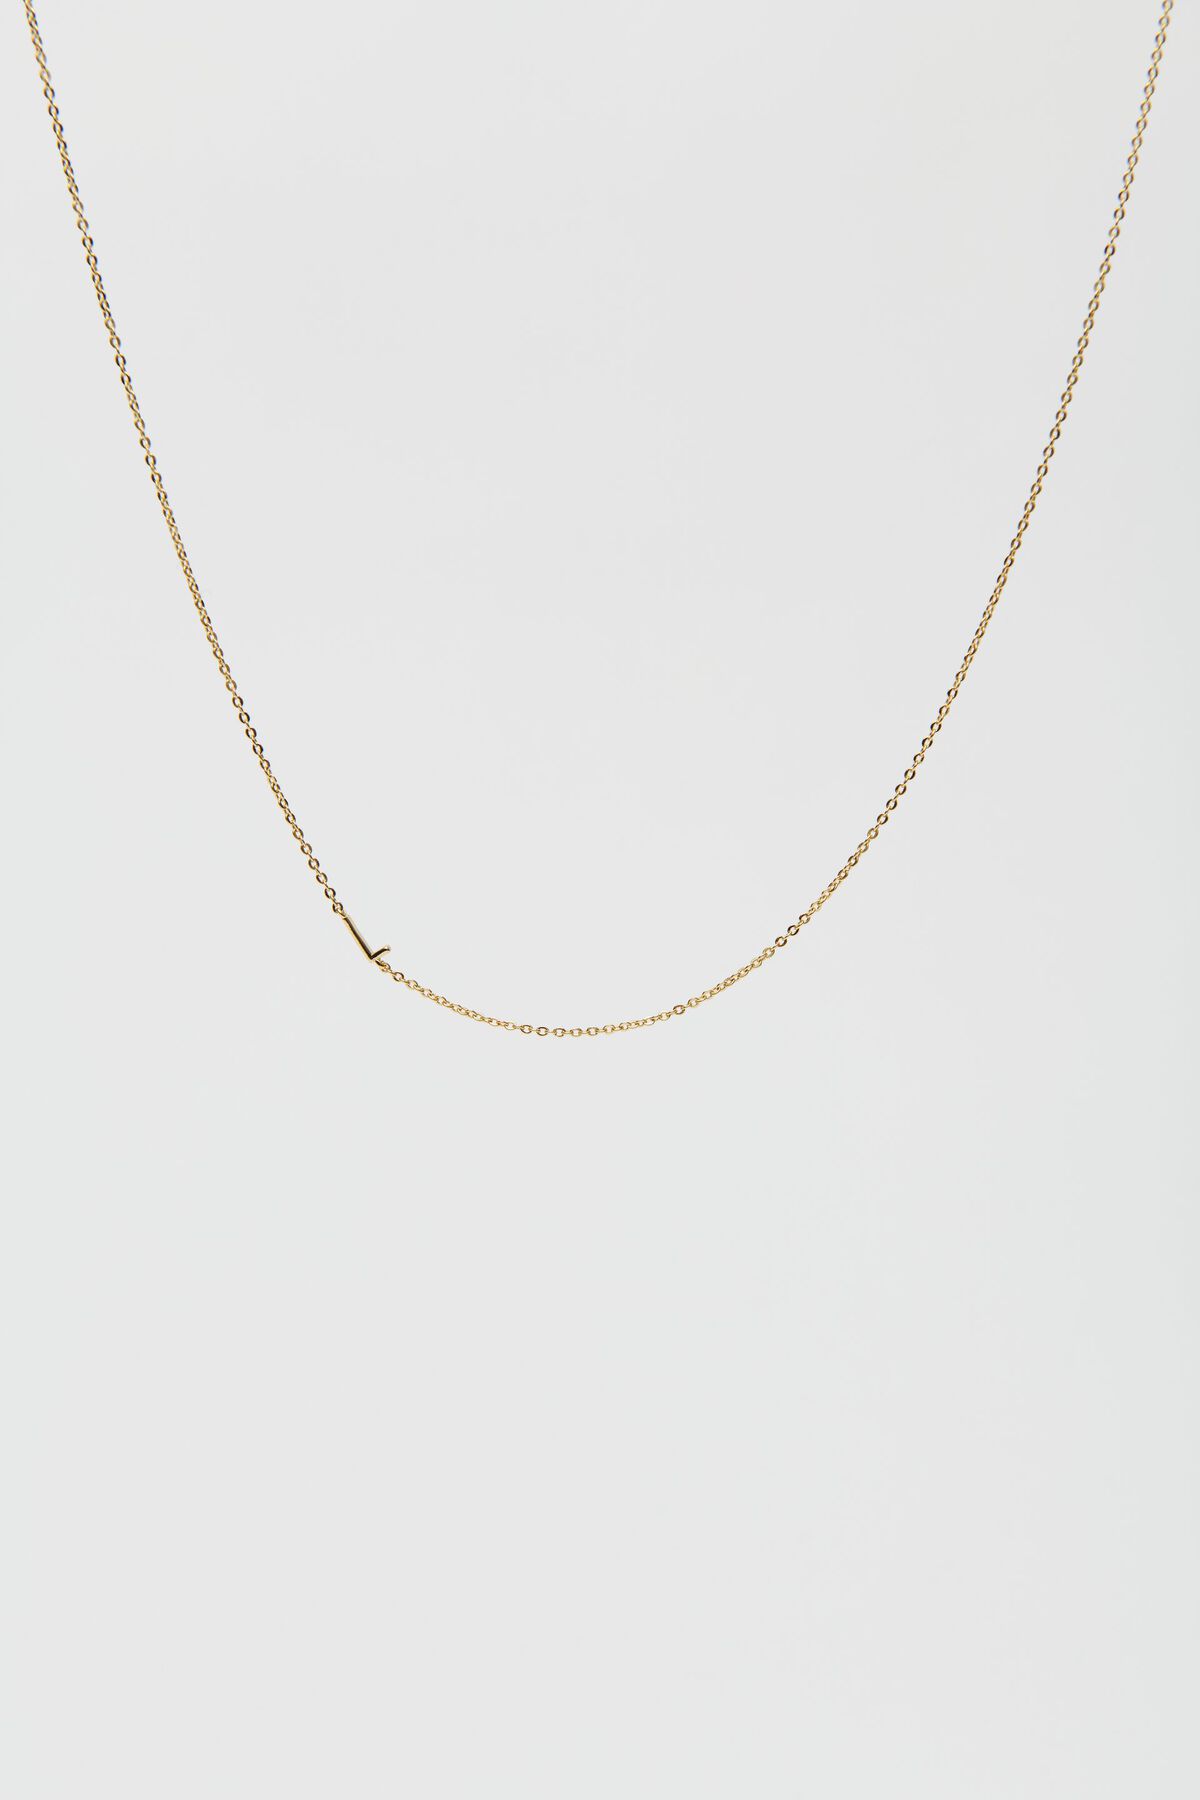 Garage 14K Gold Plated Initial Necklace. 5